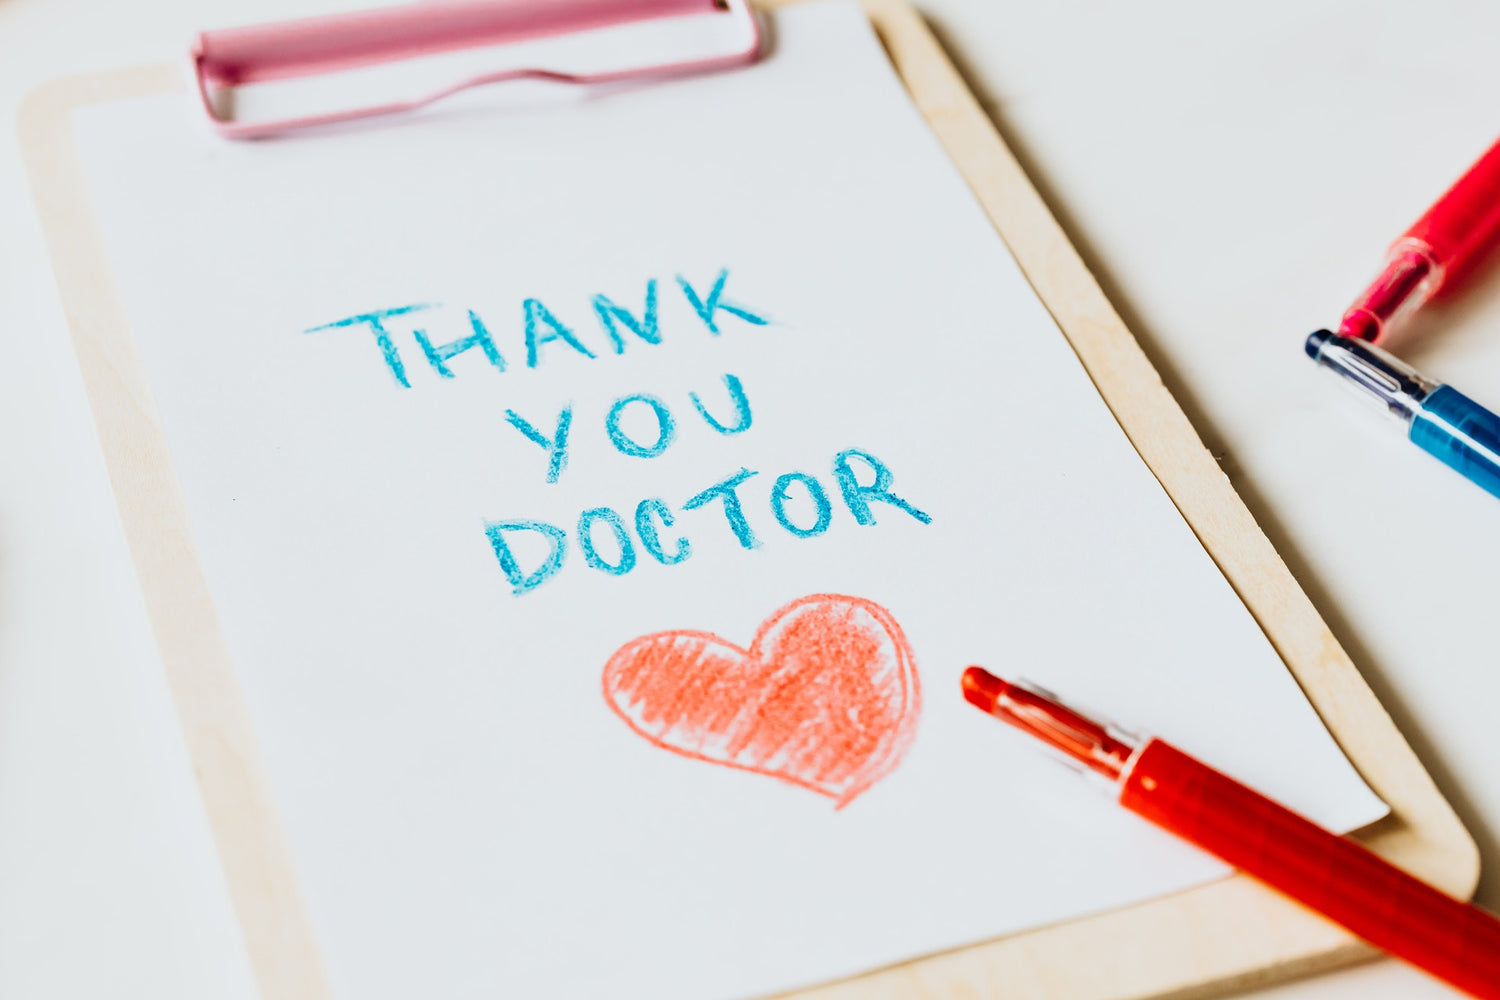 A clipboard with the text, in crayong, "Thank you doctor" and a heart drawn under it